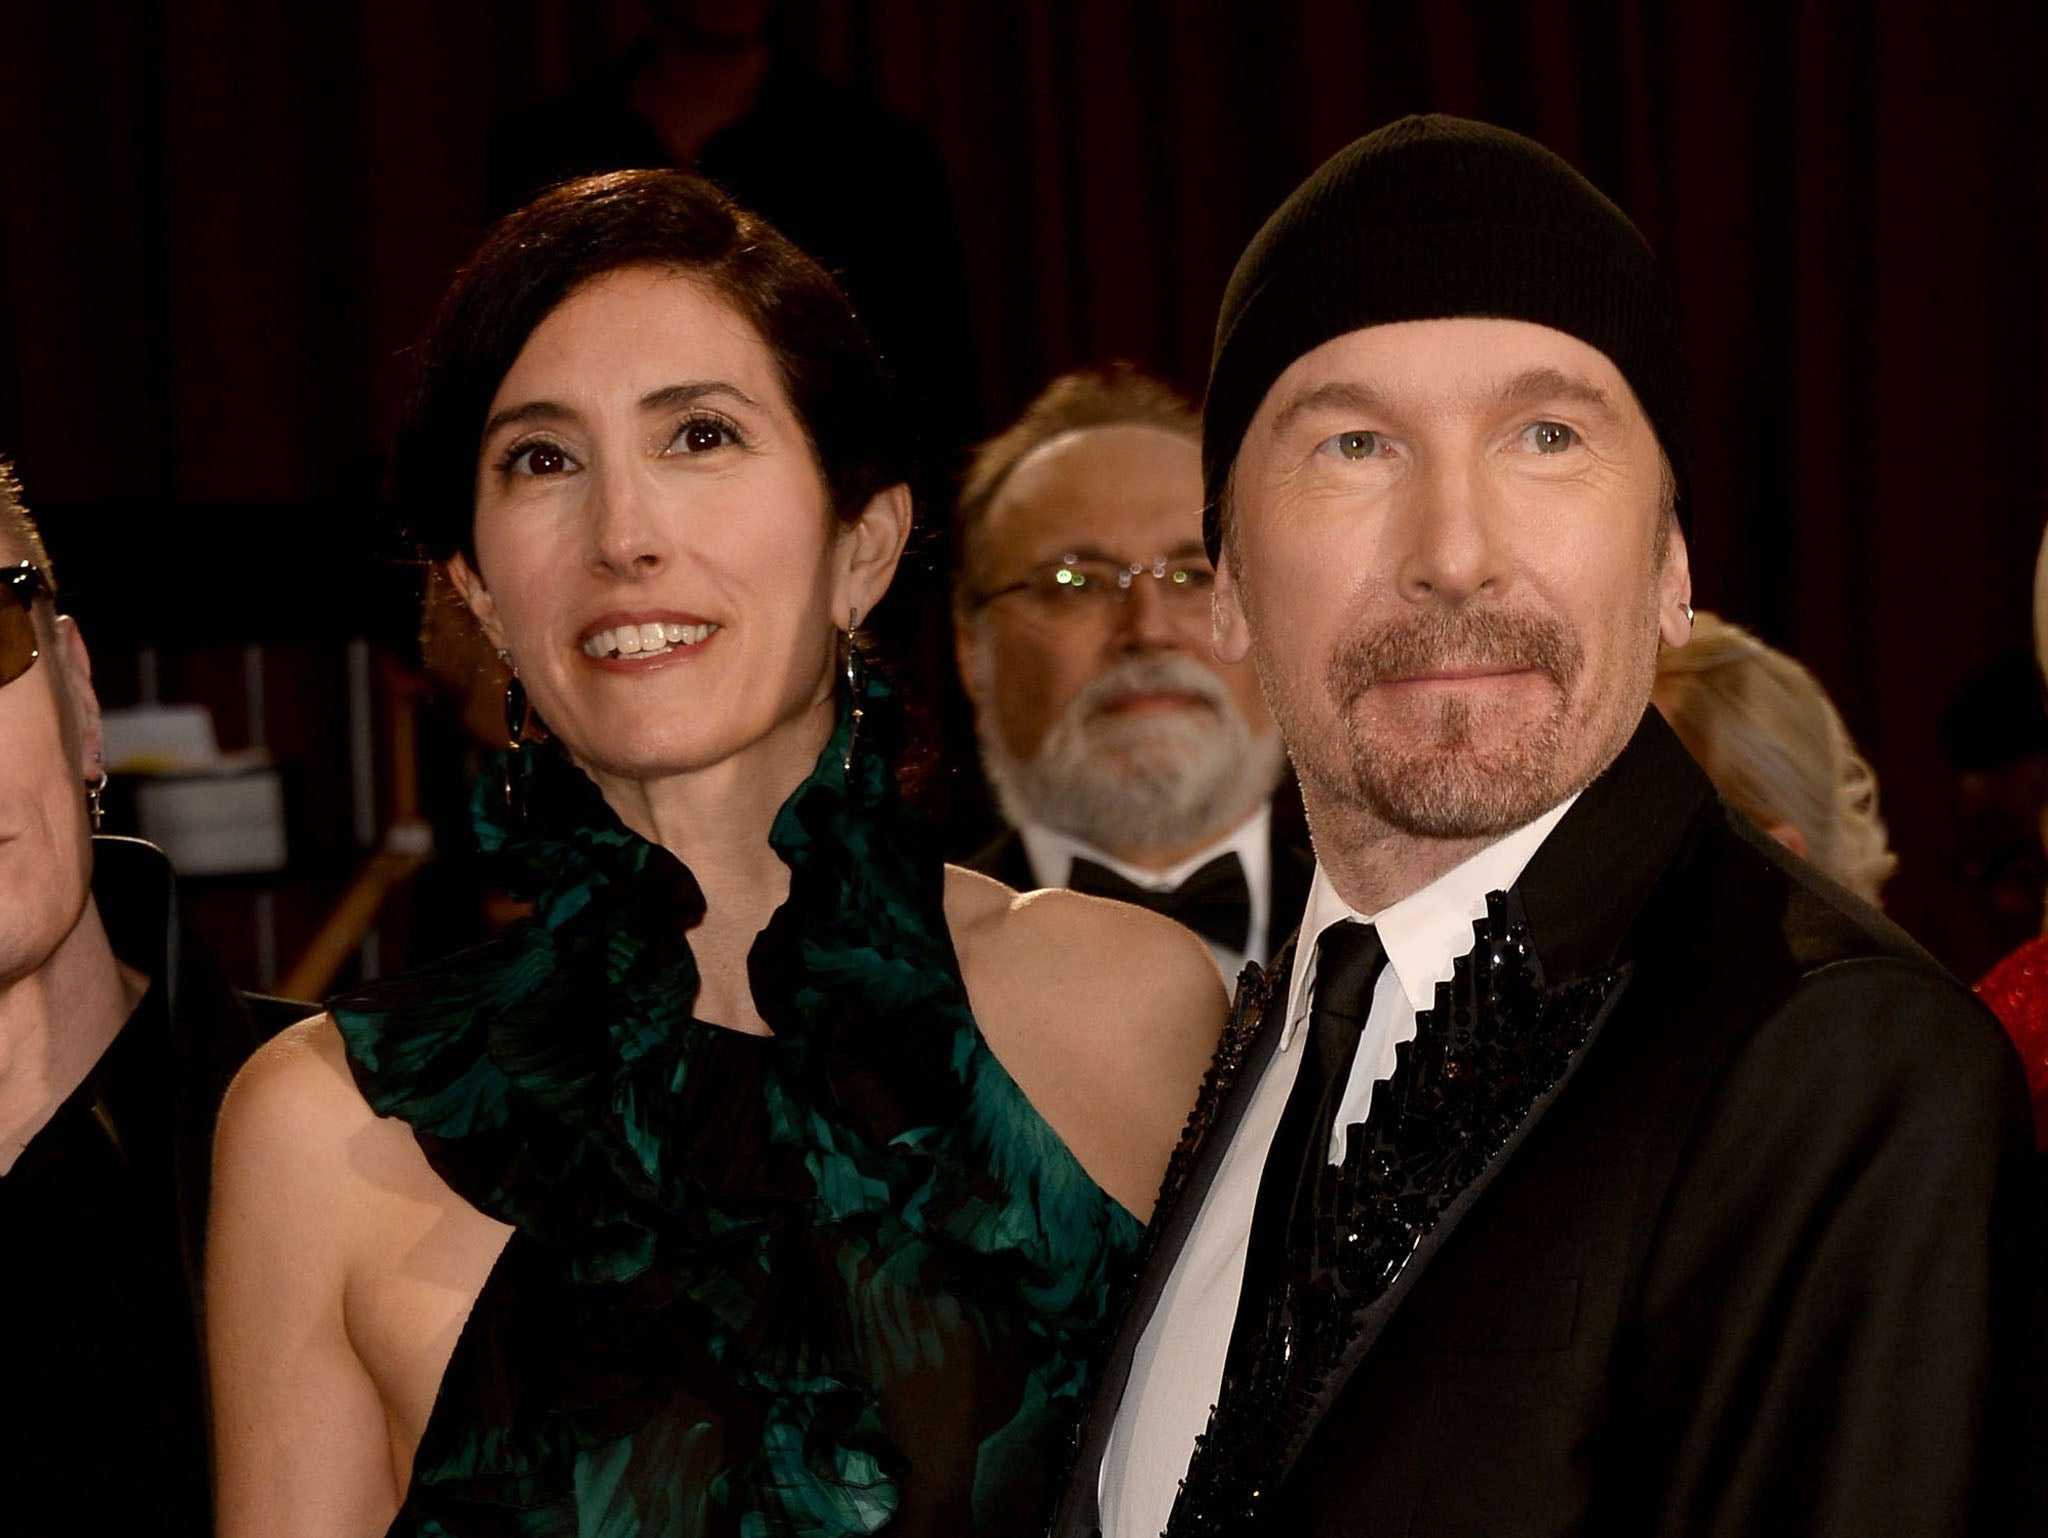 The Edge and his wife, Morleigh Steinberg, at the Academy Awards in 2014